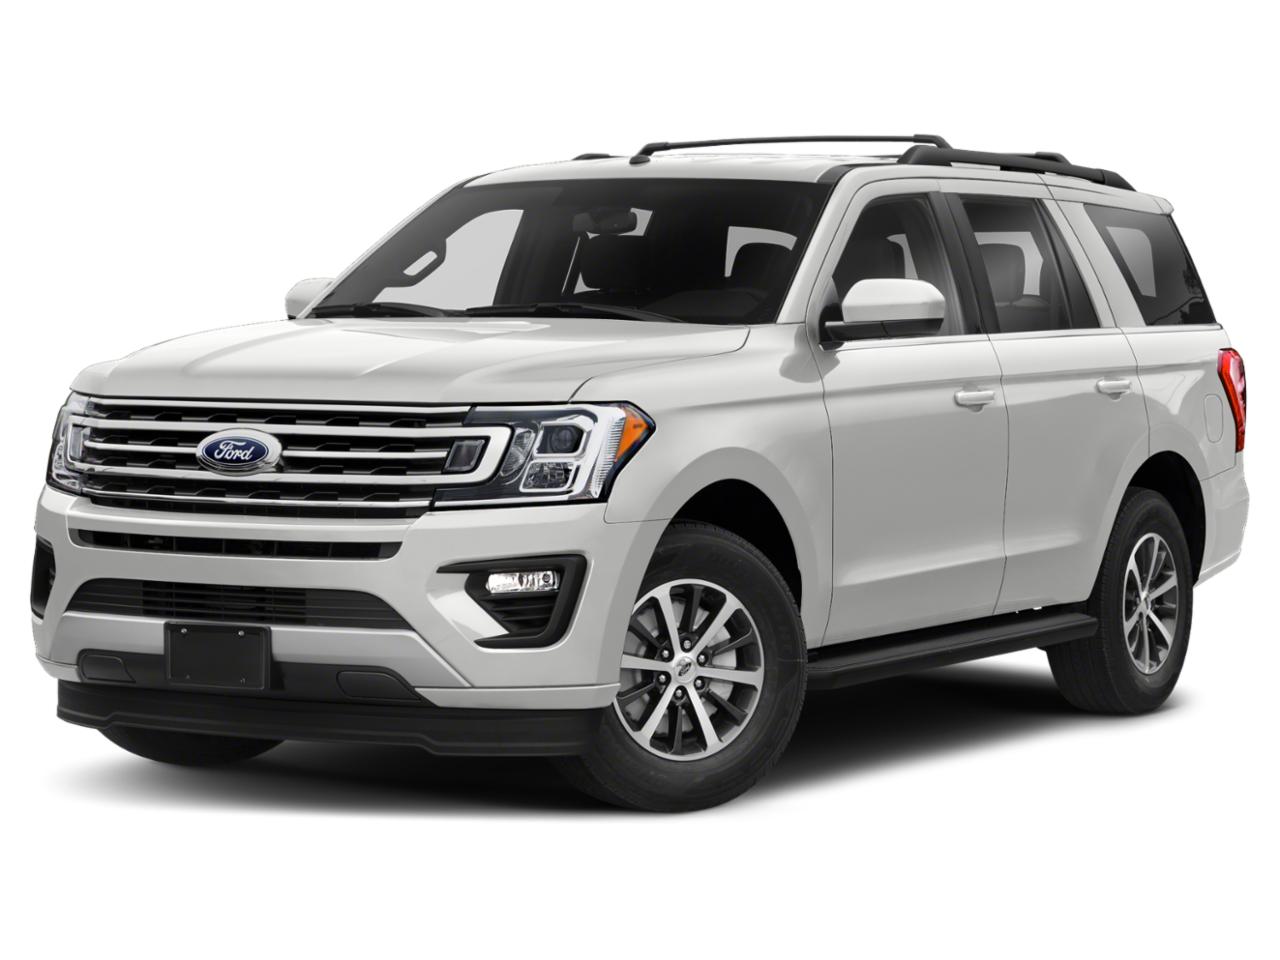 2019 Ford Expedition Vehicle Photo in Trevose, PA 19053